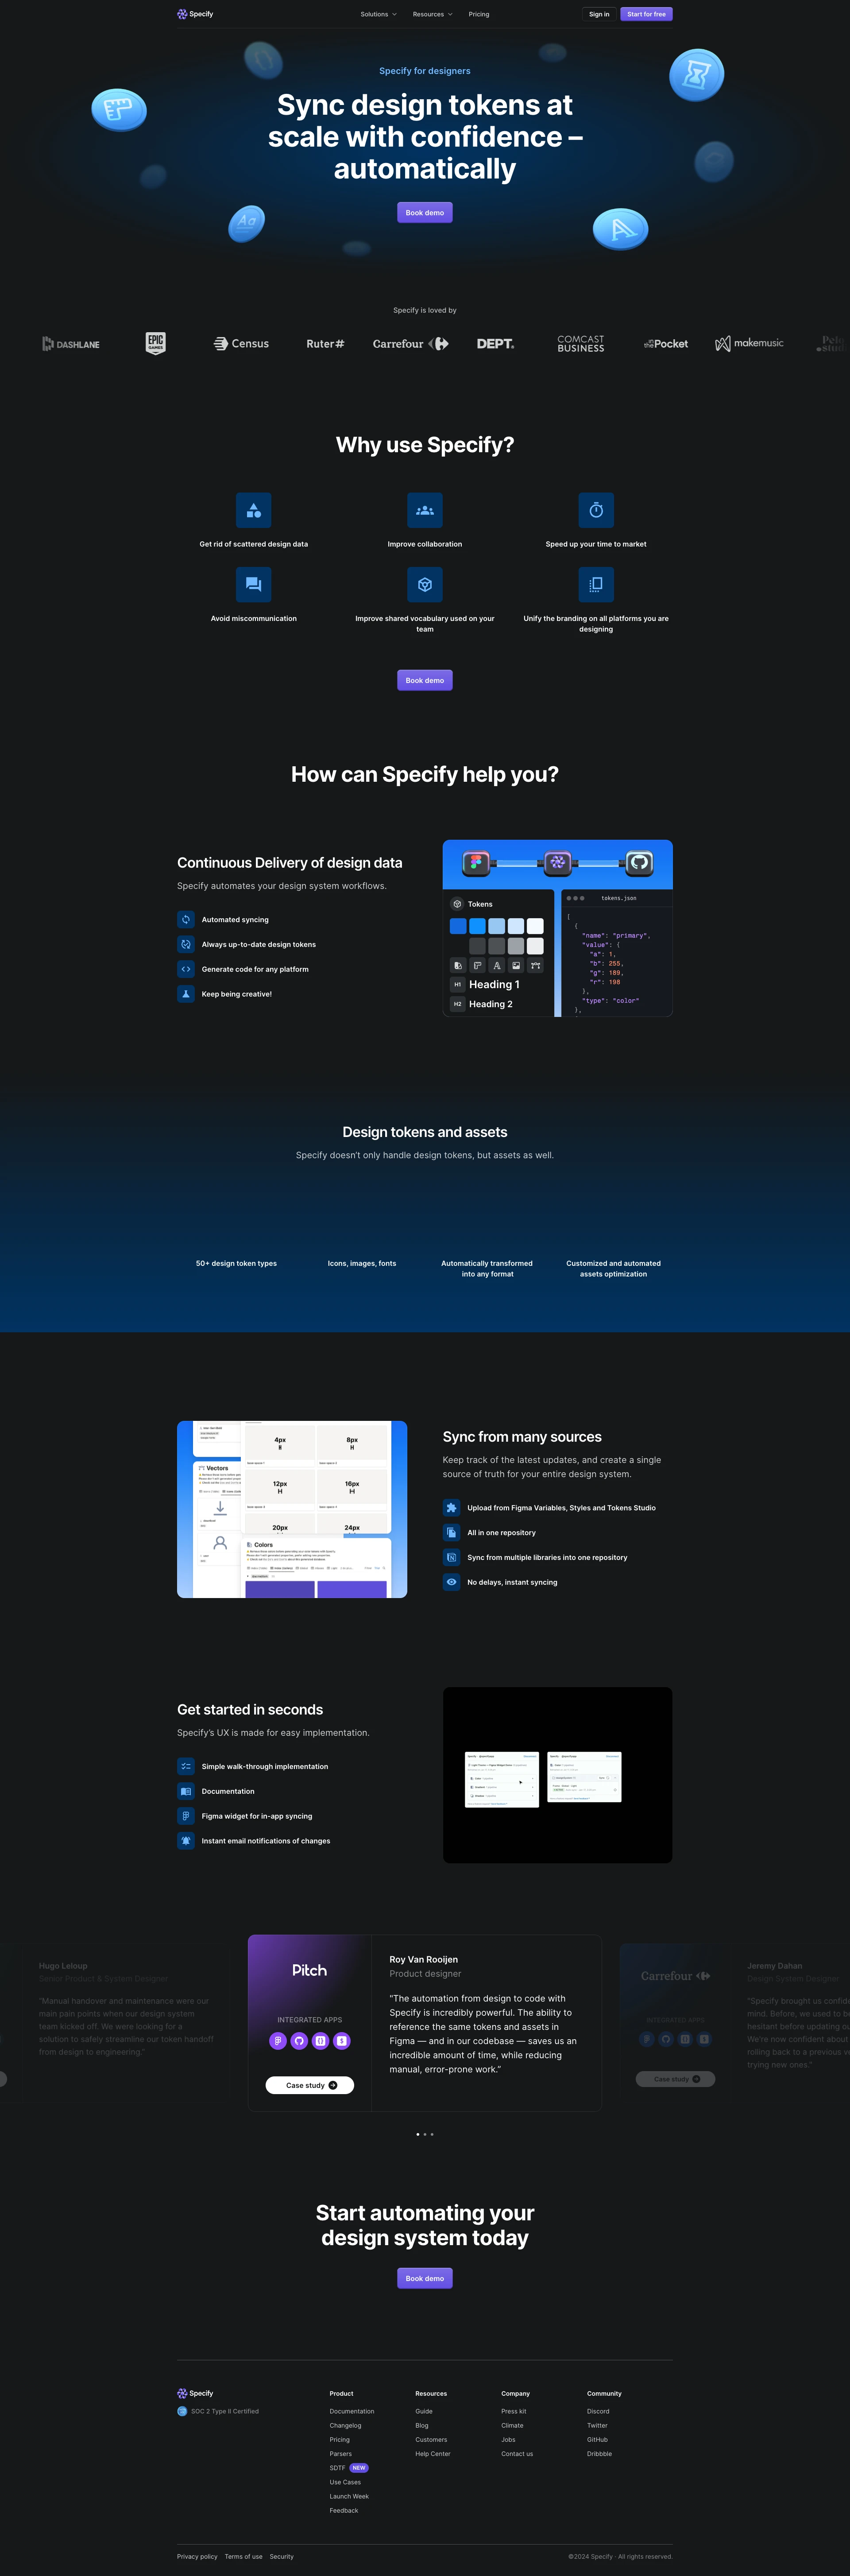 Specify Landing Page Example: Flexible and powerful, Specify makes it easy to build the exact Design Token process your Design System needs.